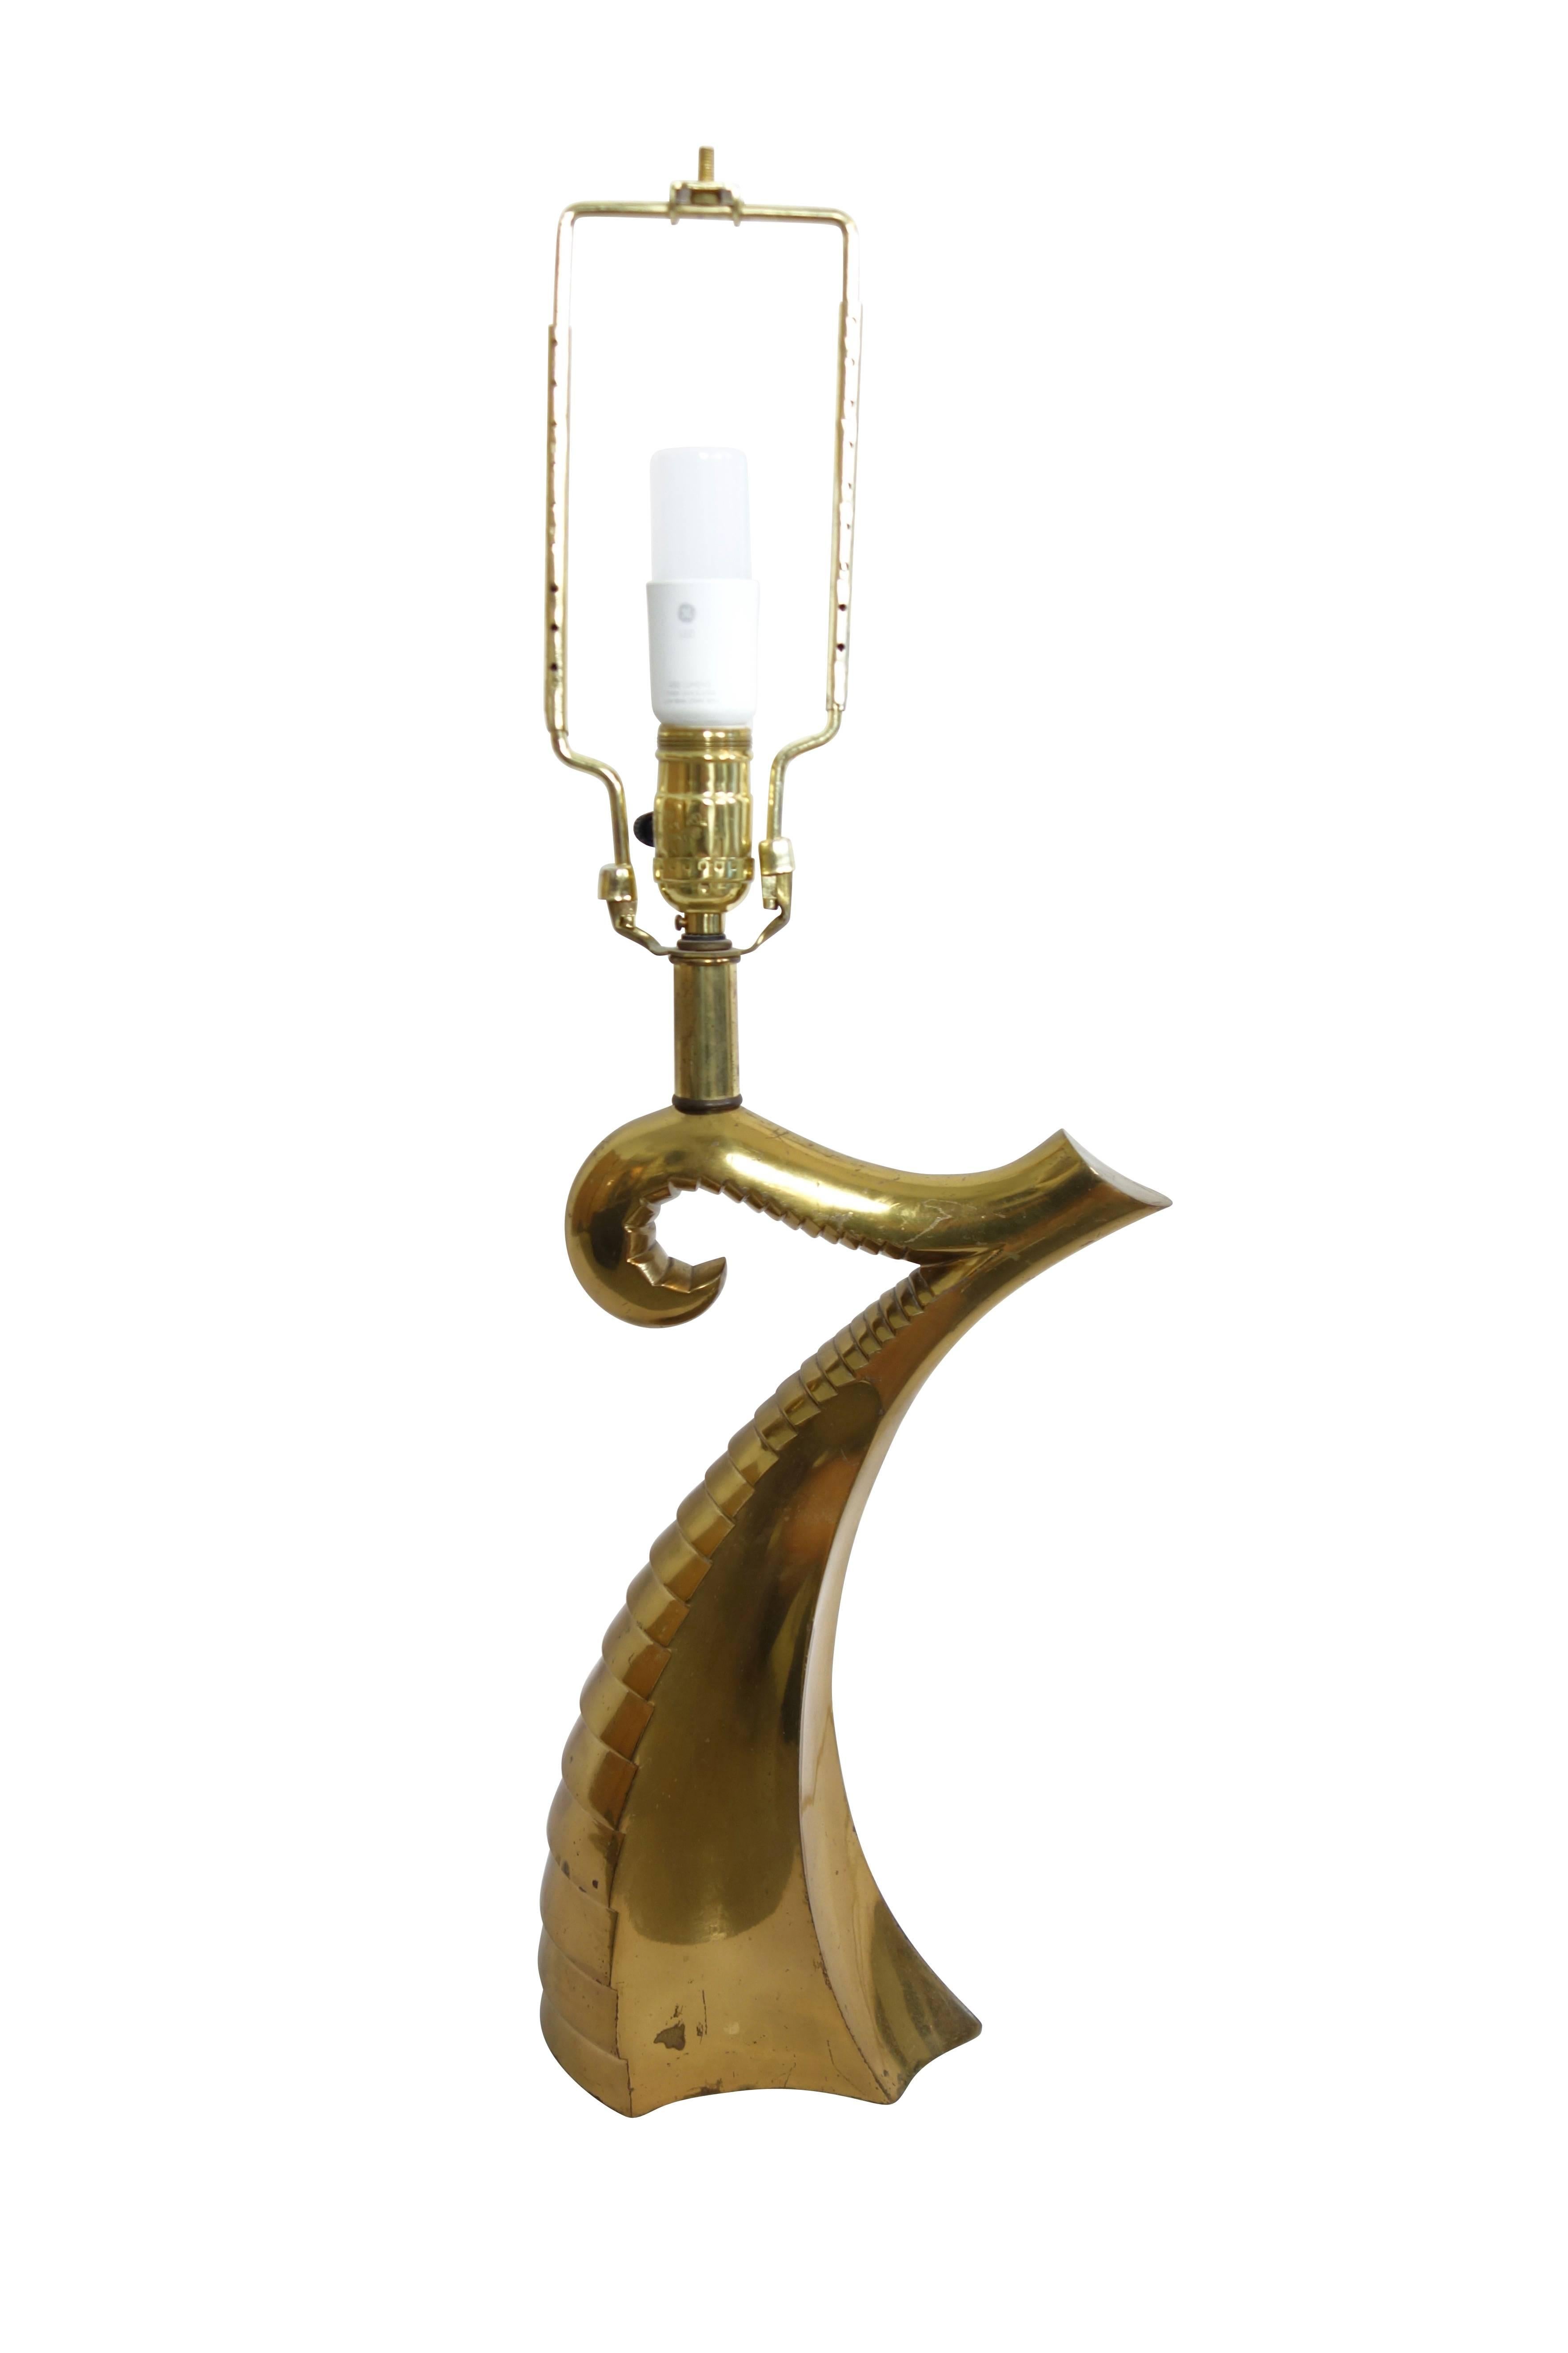 This is a sculptural brass table lamp in the form of a large tentacle, circa 1970.